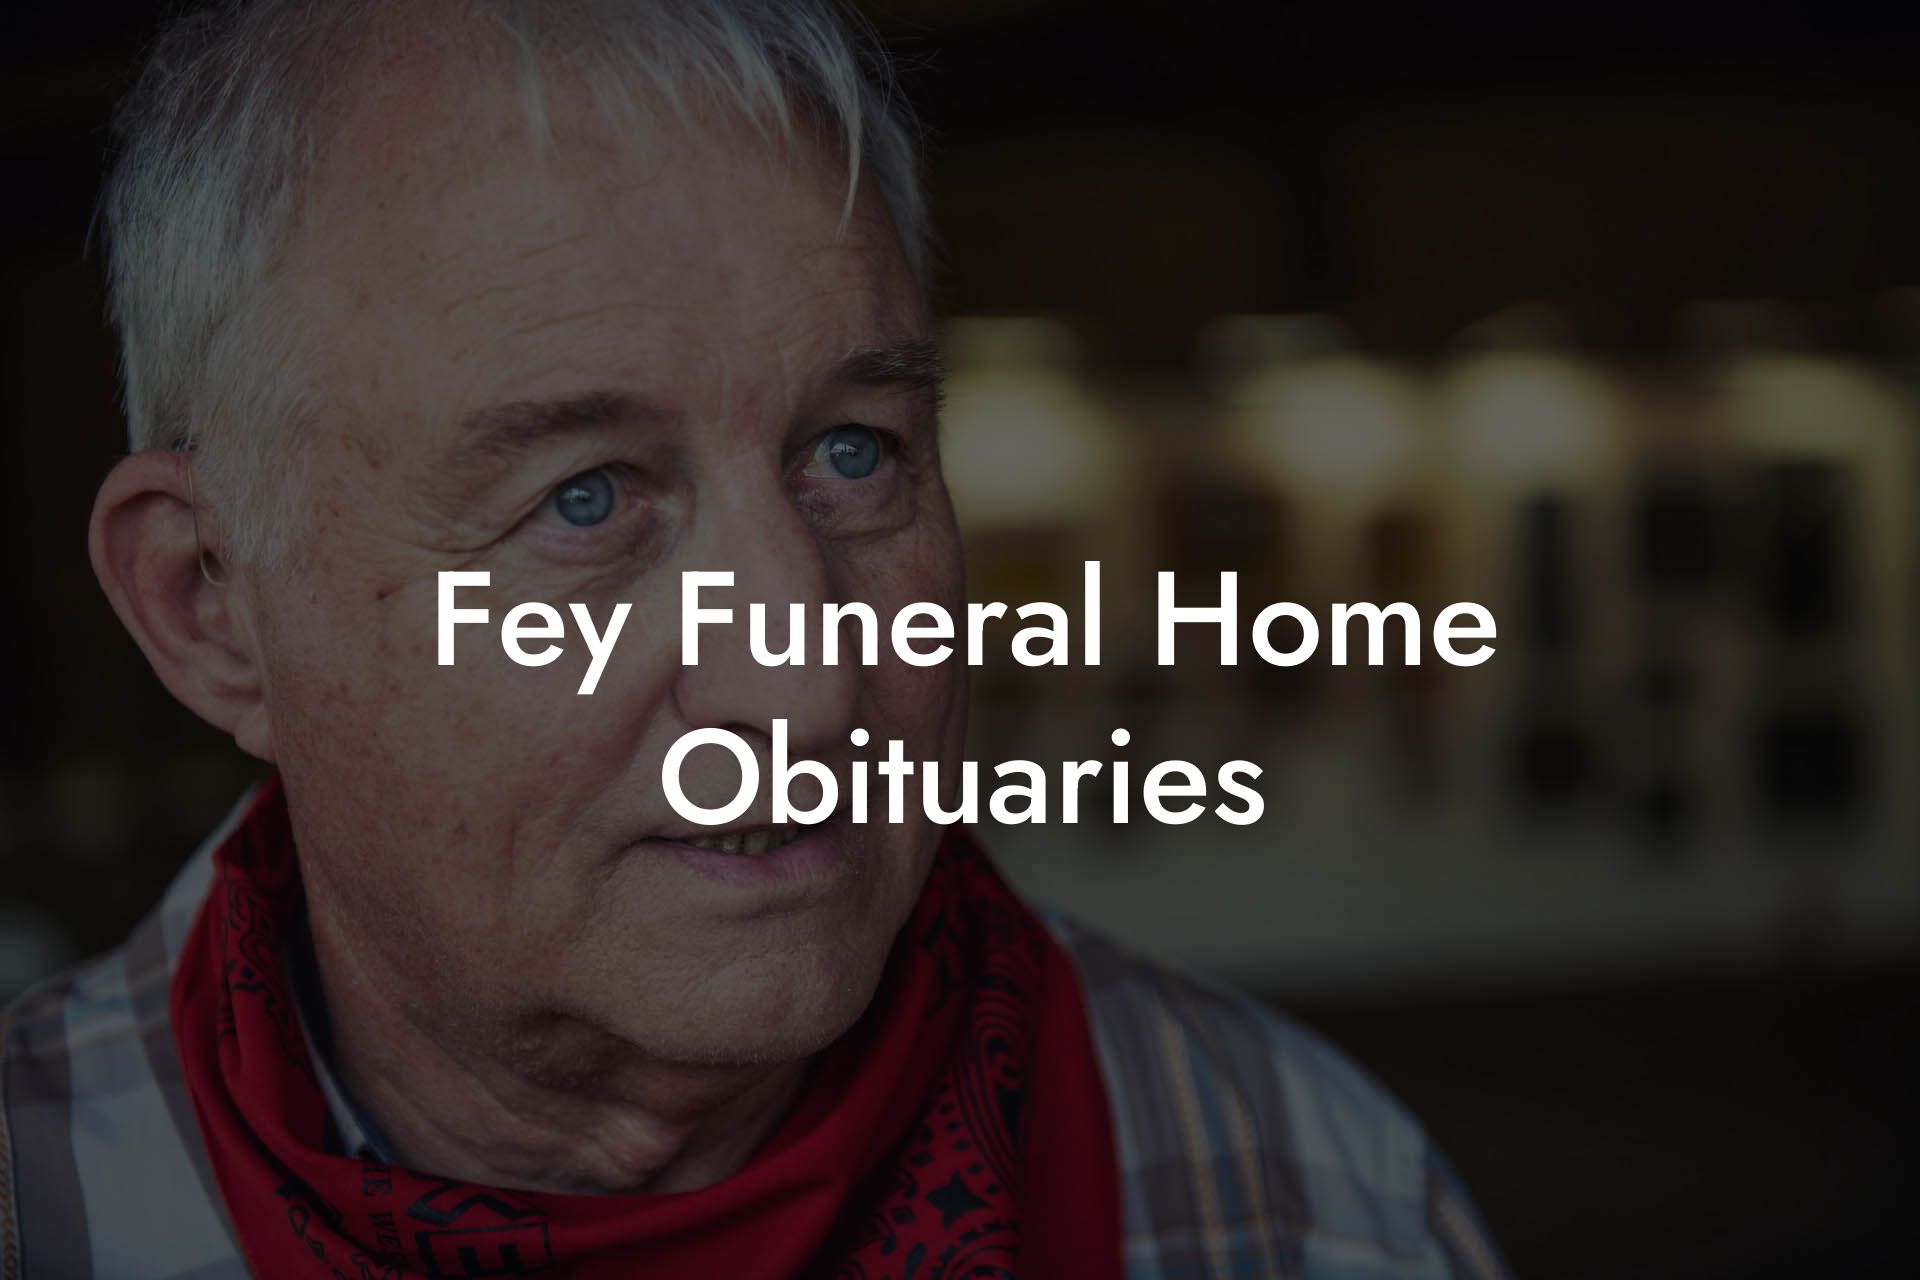 Fey Funeral Home Obituaries